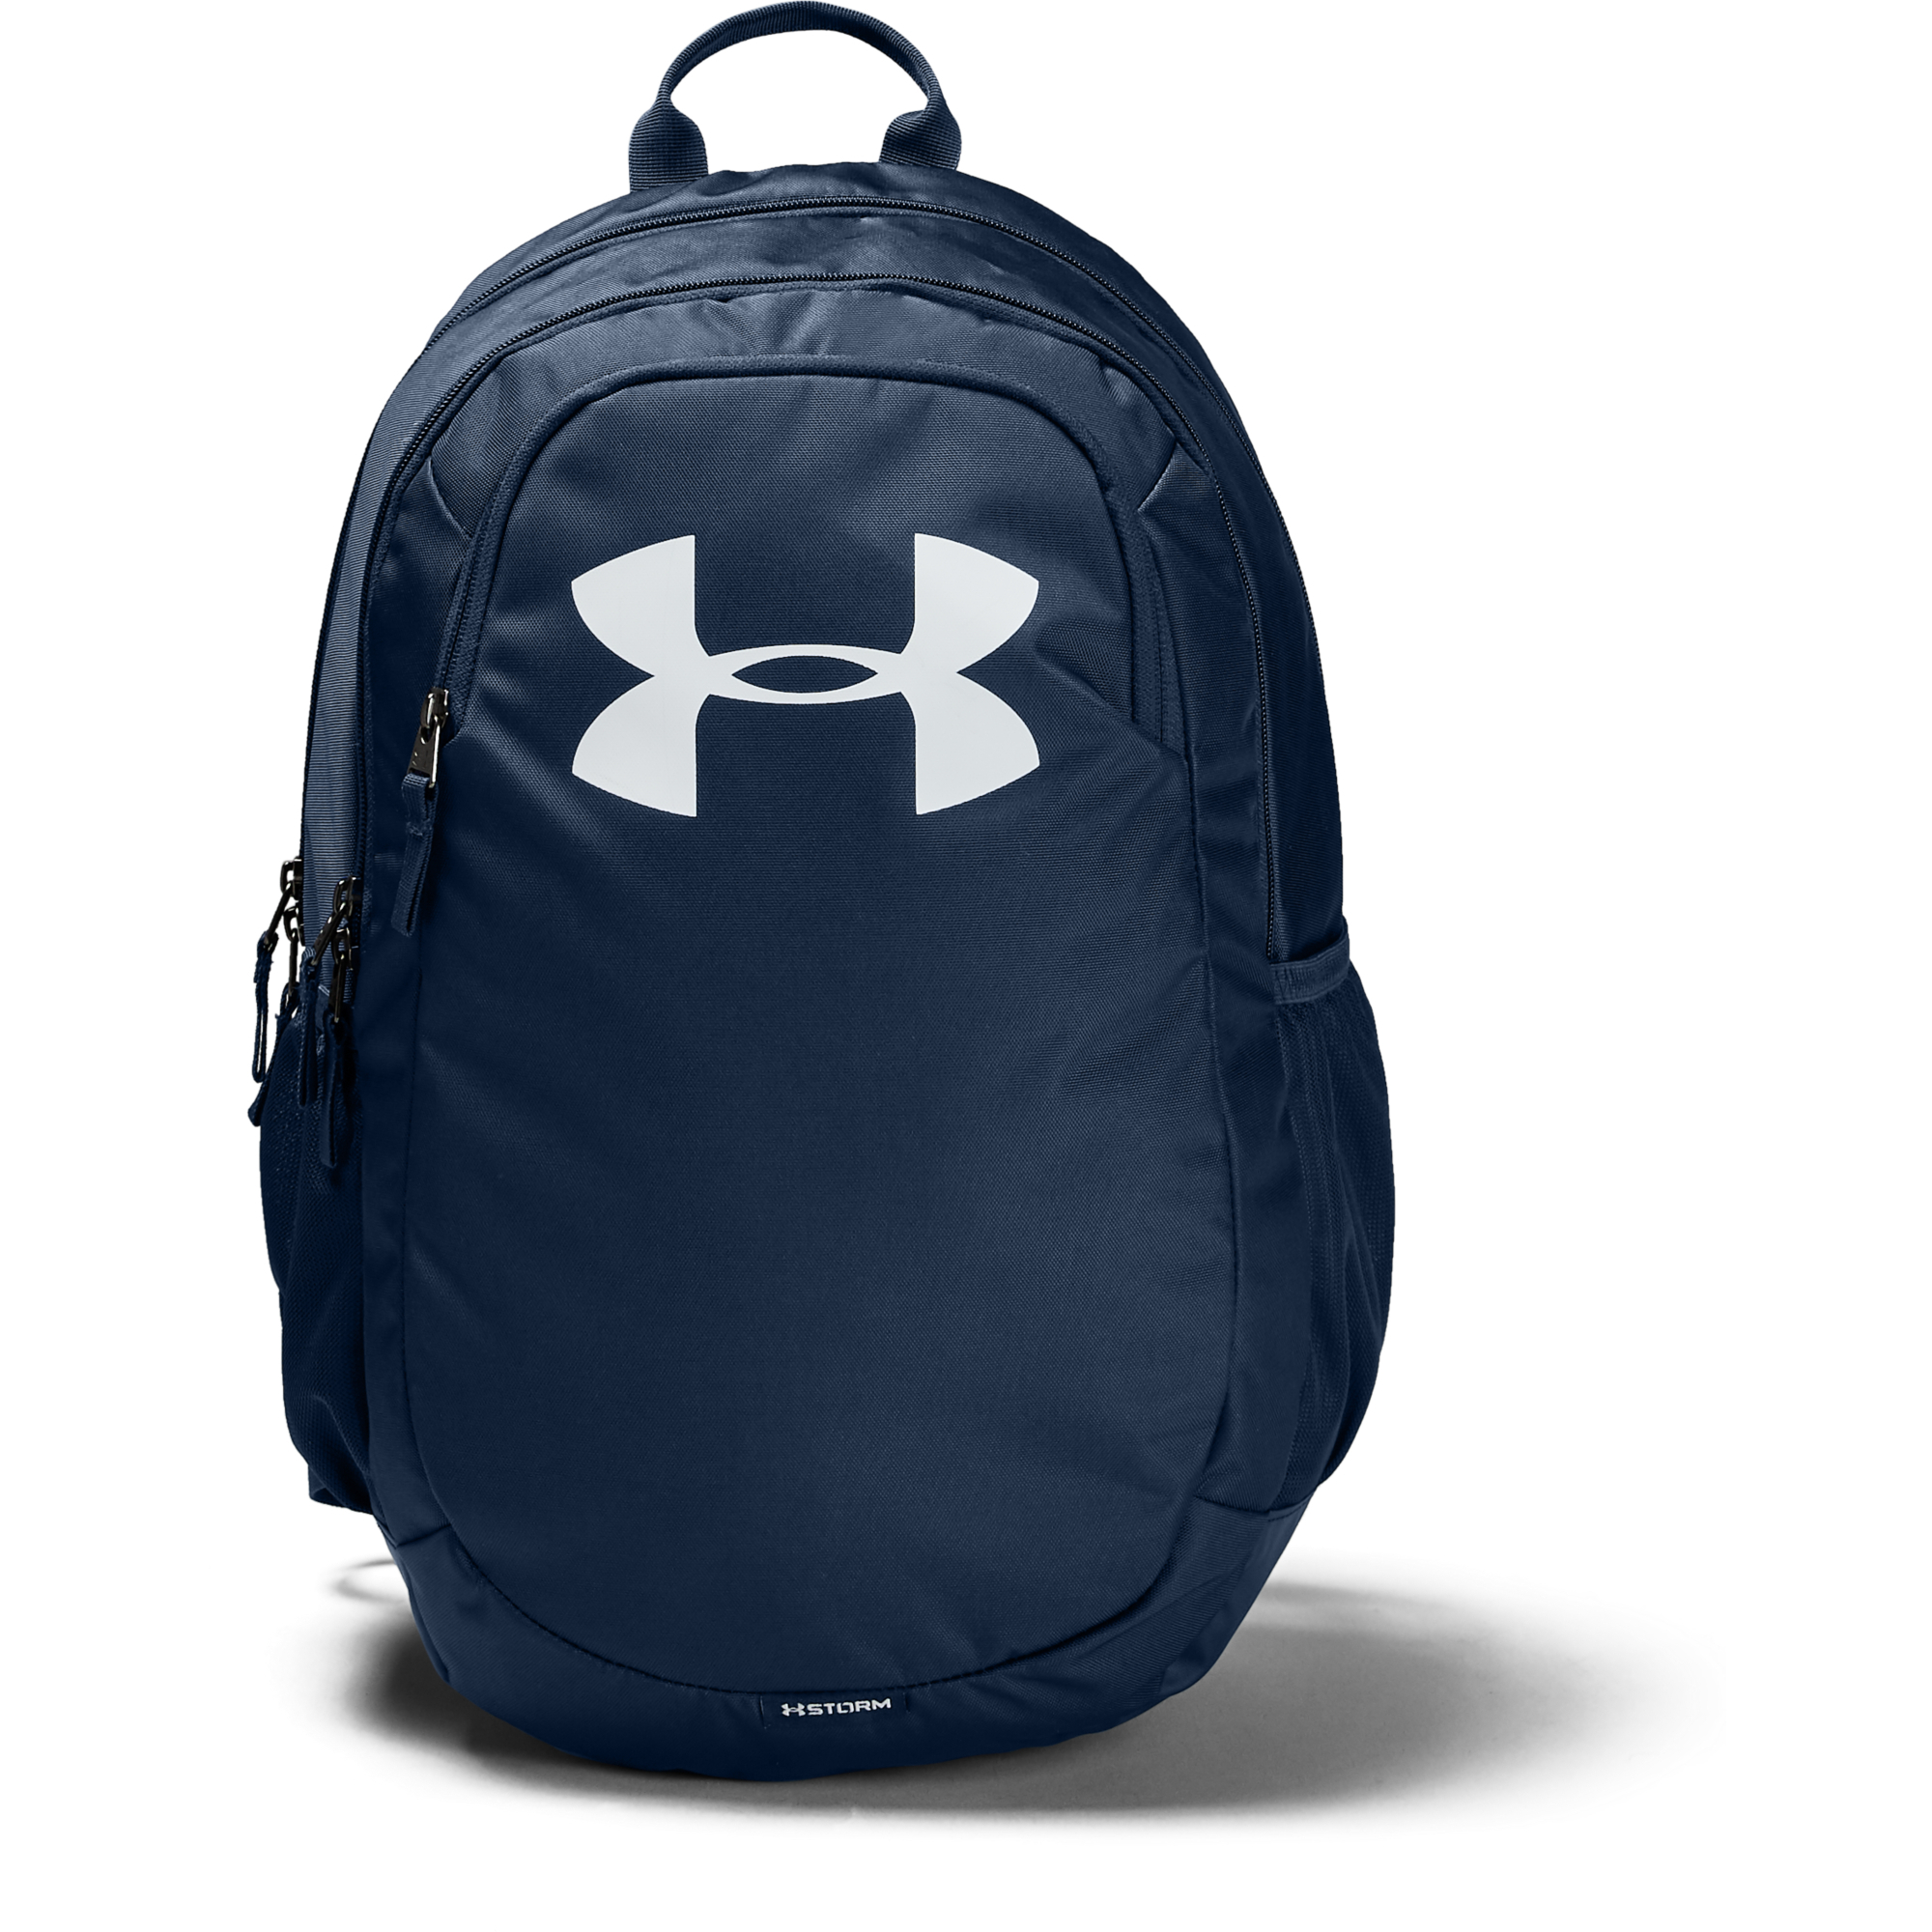 Раници Under Armour Scrimmage 2.0 Blue 508135